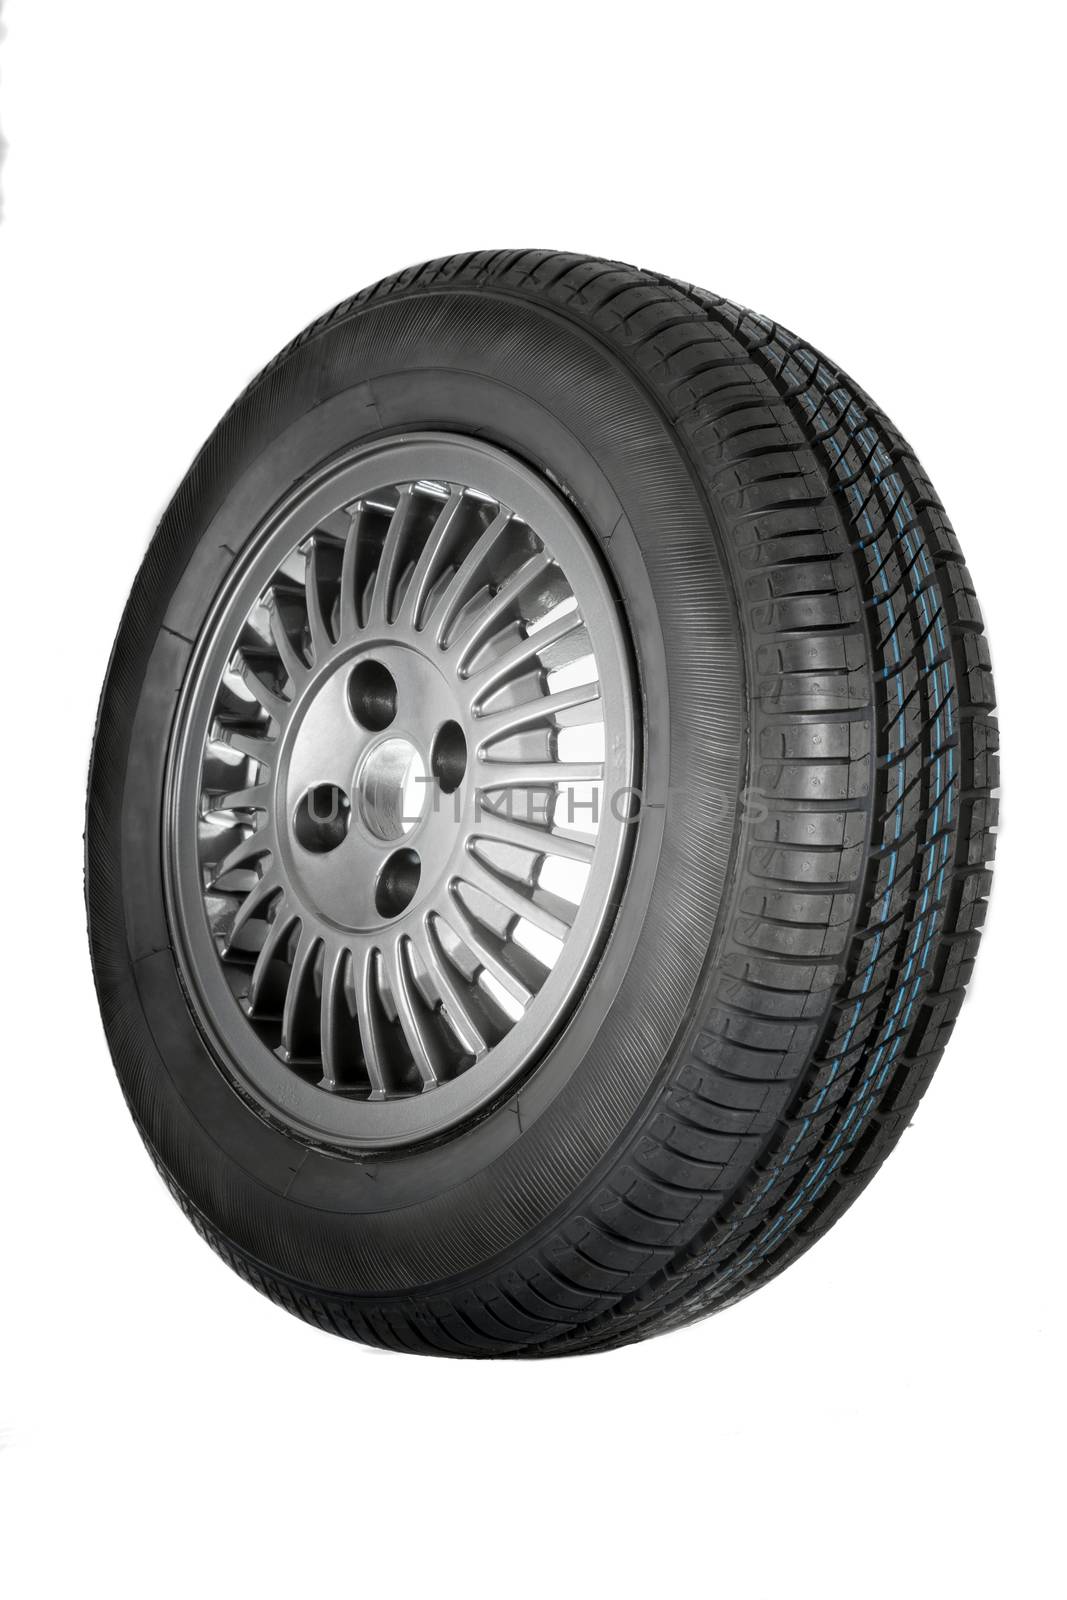 New and unused car tires against white isolated background